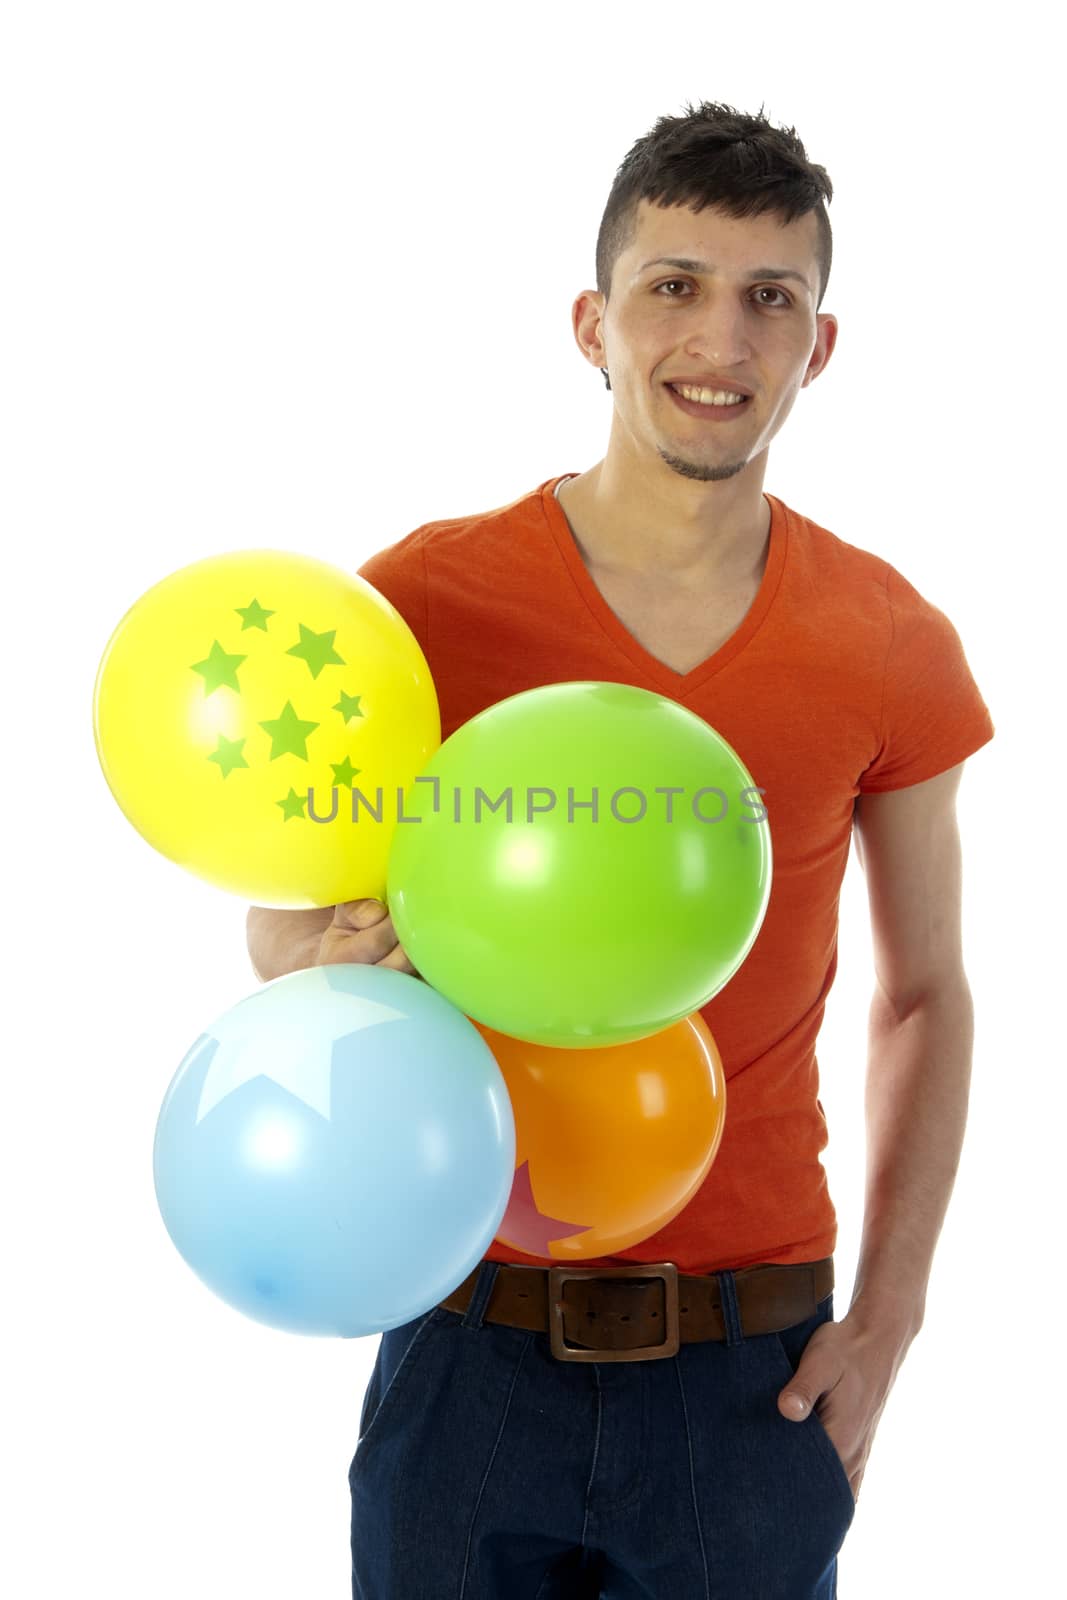 a happy birthday boy with a lot of colorful balloons